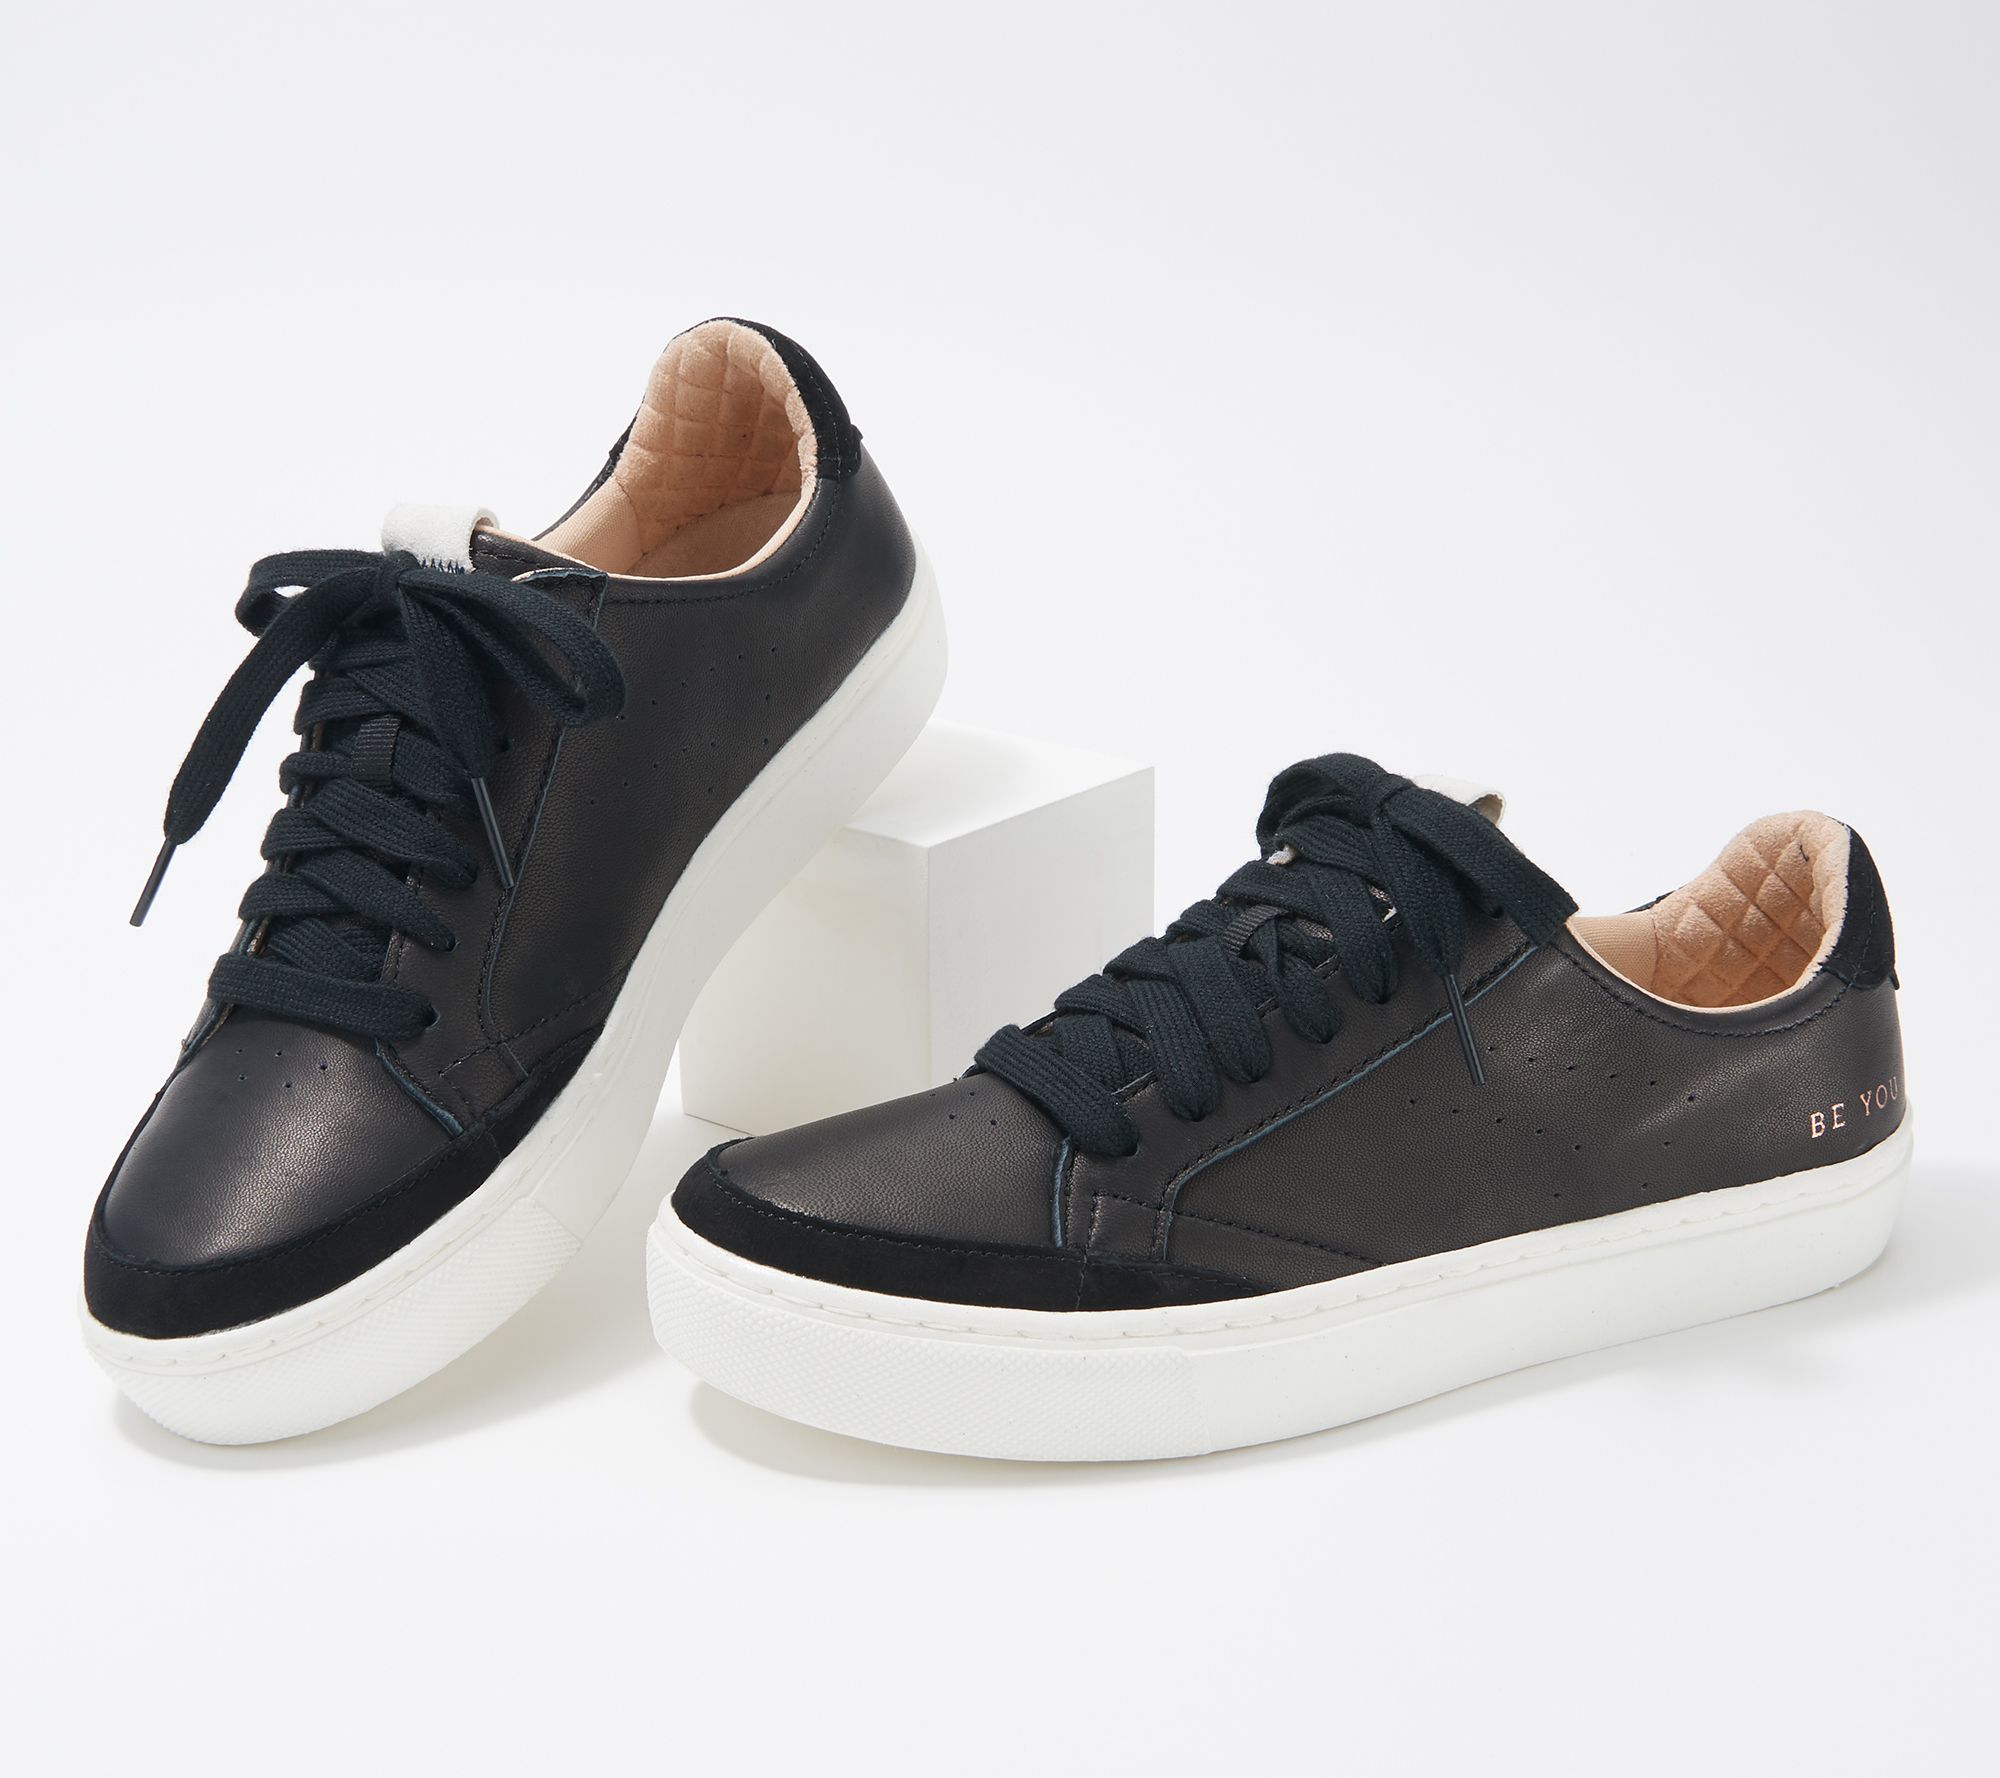 Dr. Scholl's Lace-Up Casual Sneakers 